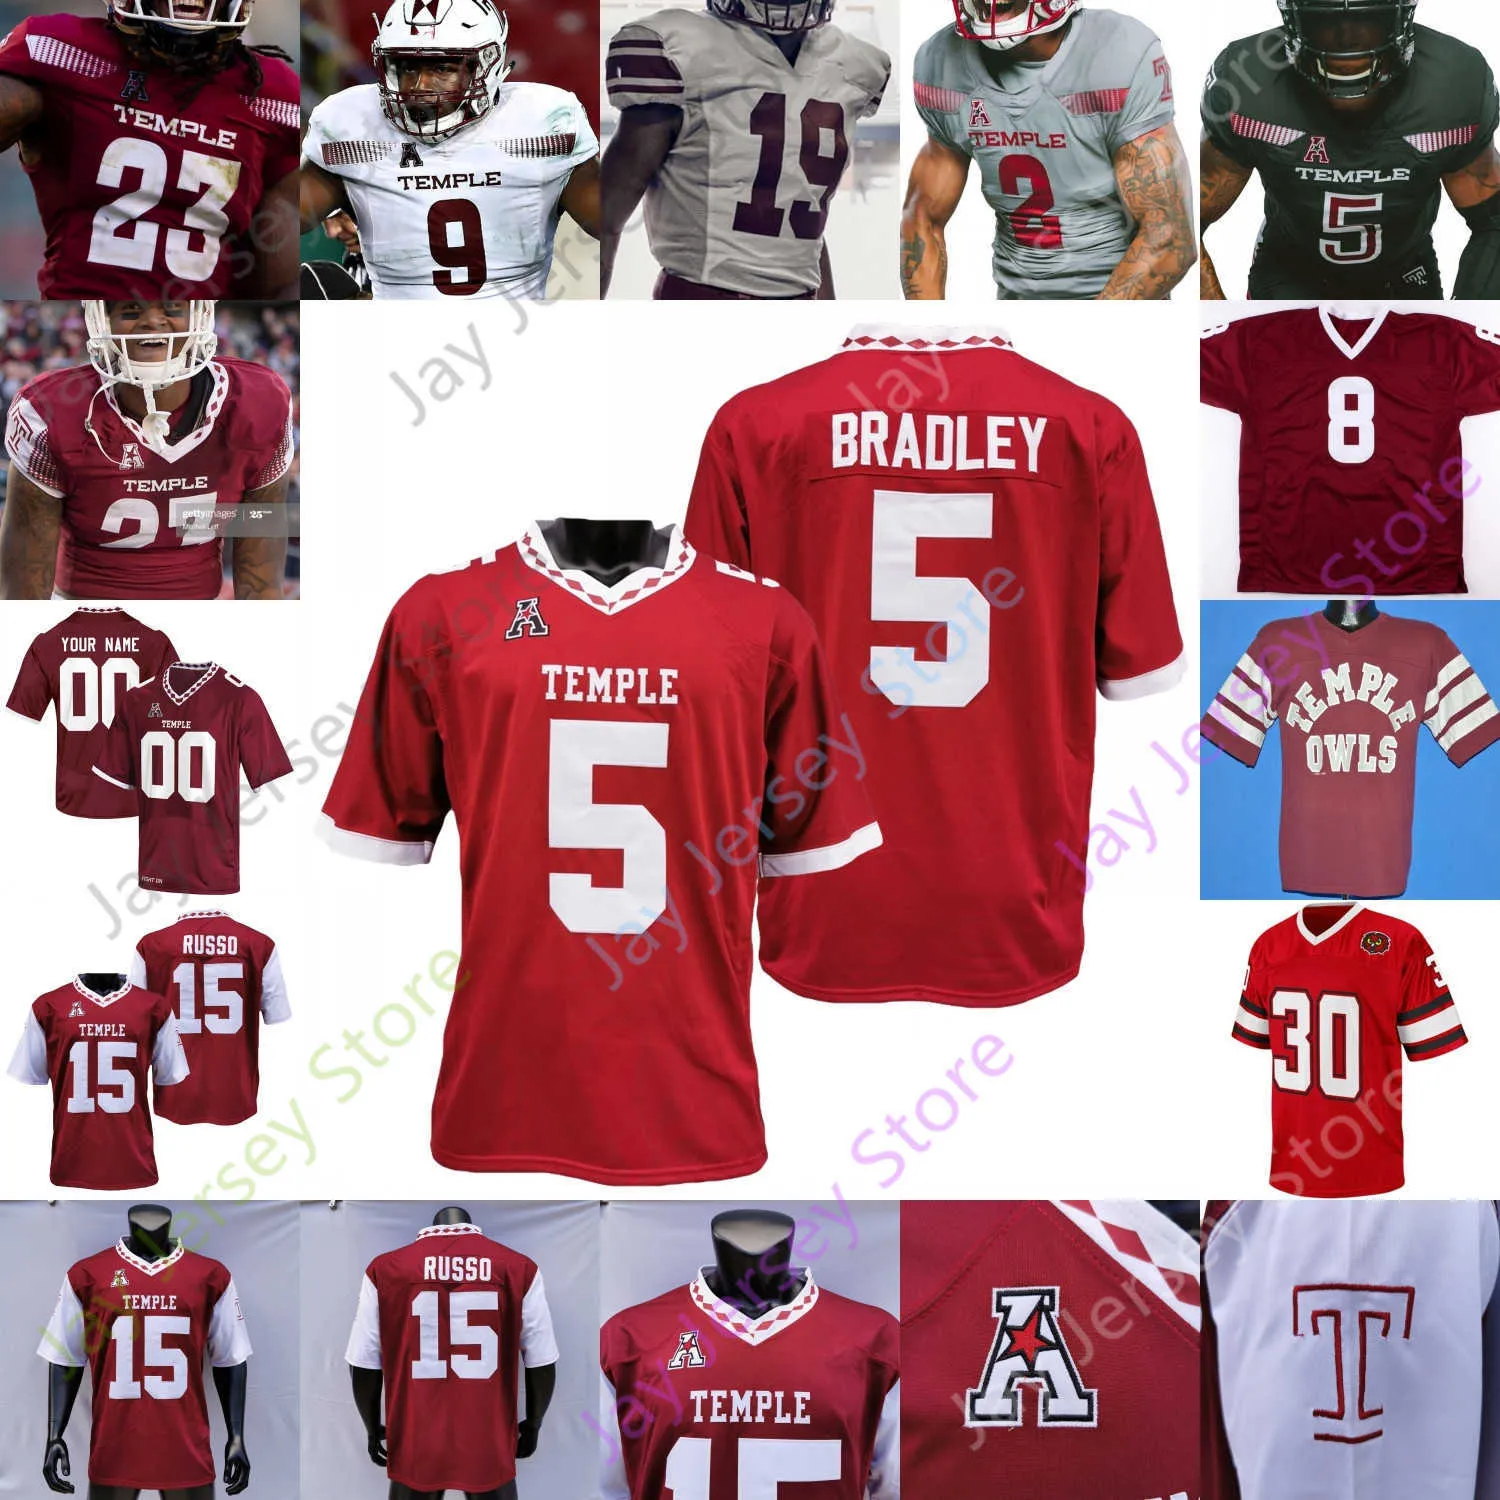 Temple Owls Football Jersey NCAA Zack Mesday Ryquell Armstead Ventull Bryant Michael Dogbe Matakevich Anderson Wilkerson